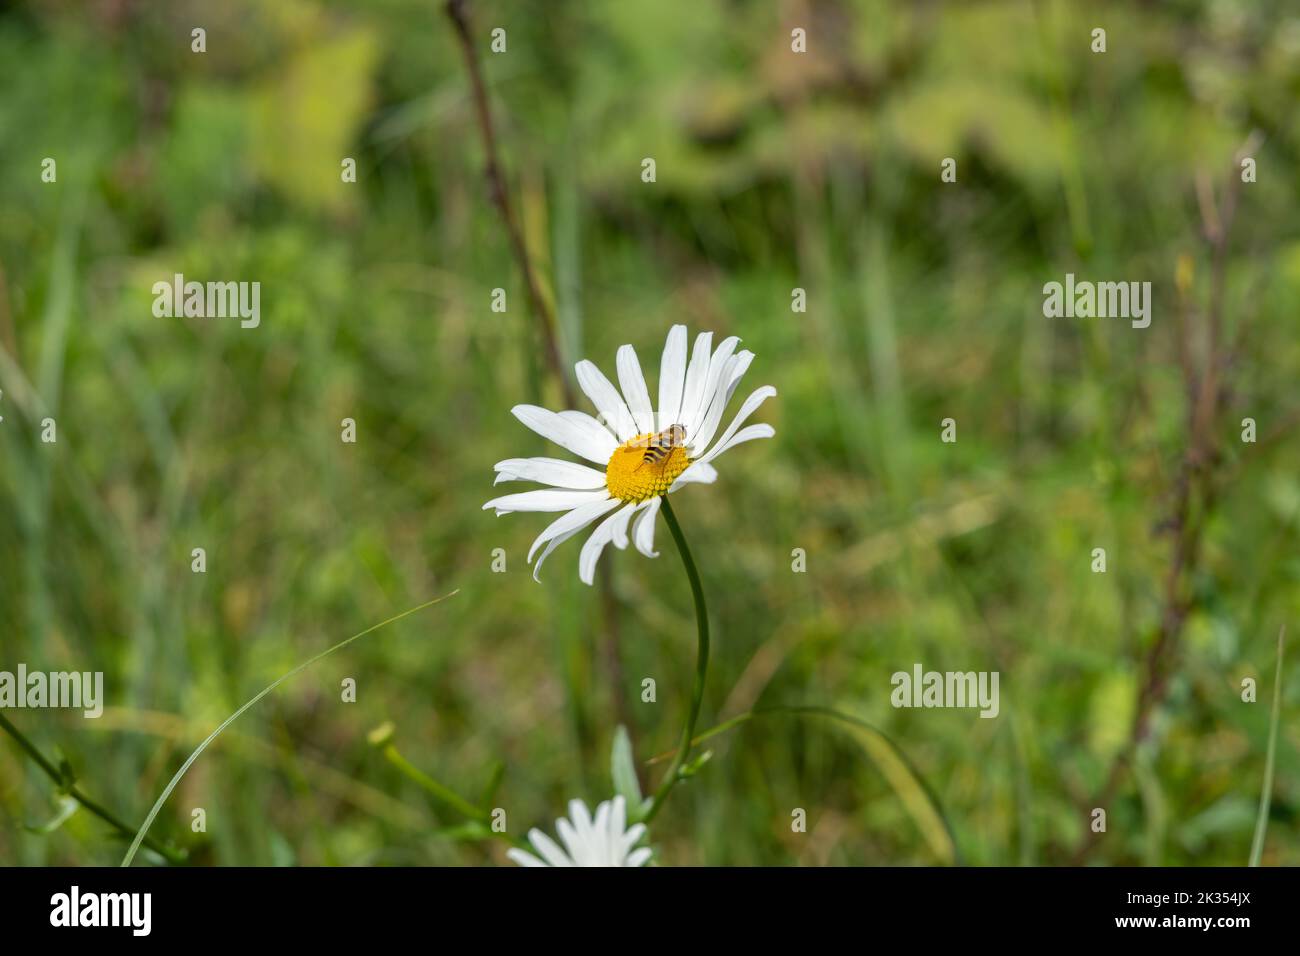 Oxeye daisy with a bee on it in the blurred green grass Stock Photo